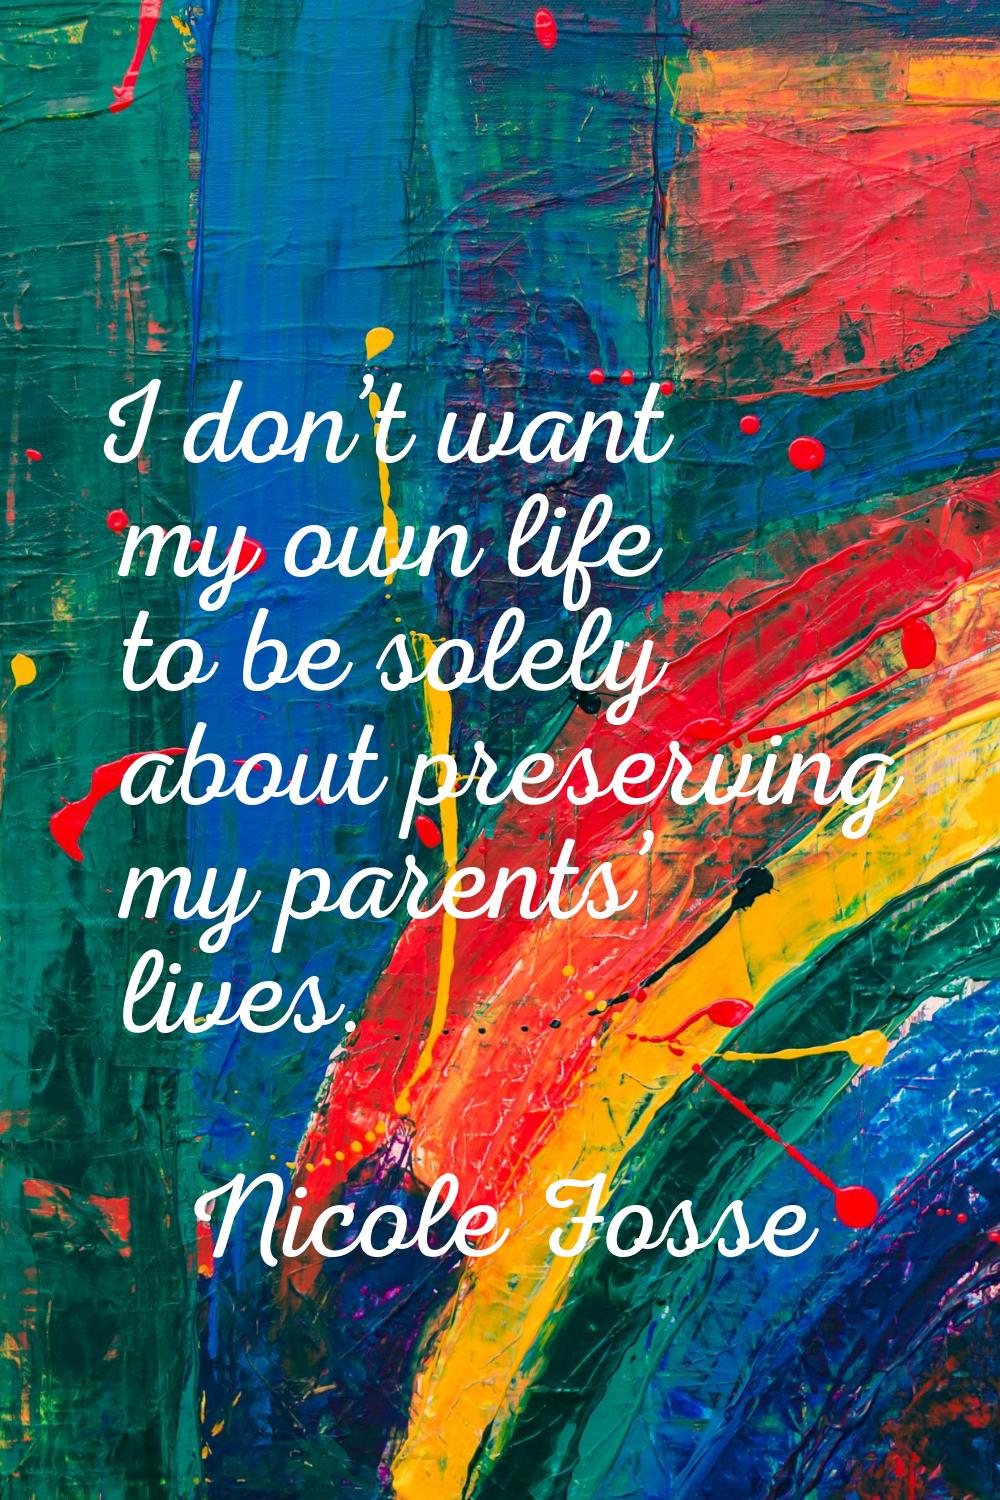 I don’t want my own life to be solely about preserving my parents’ lives.